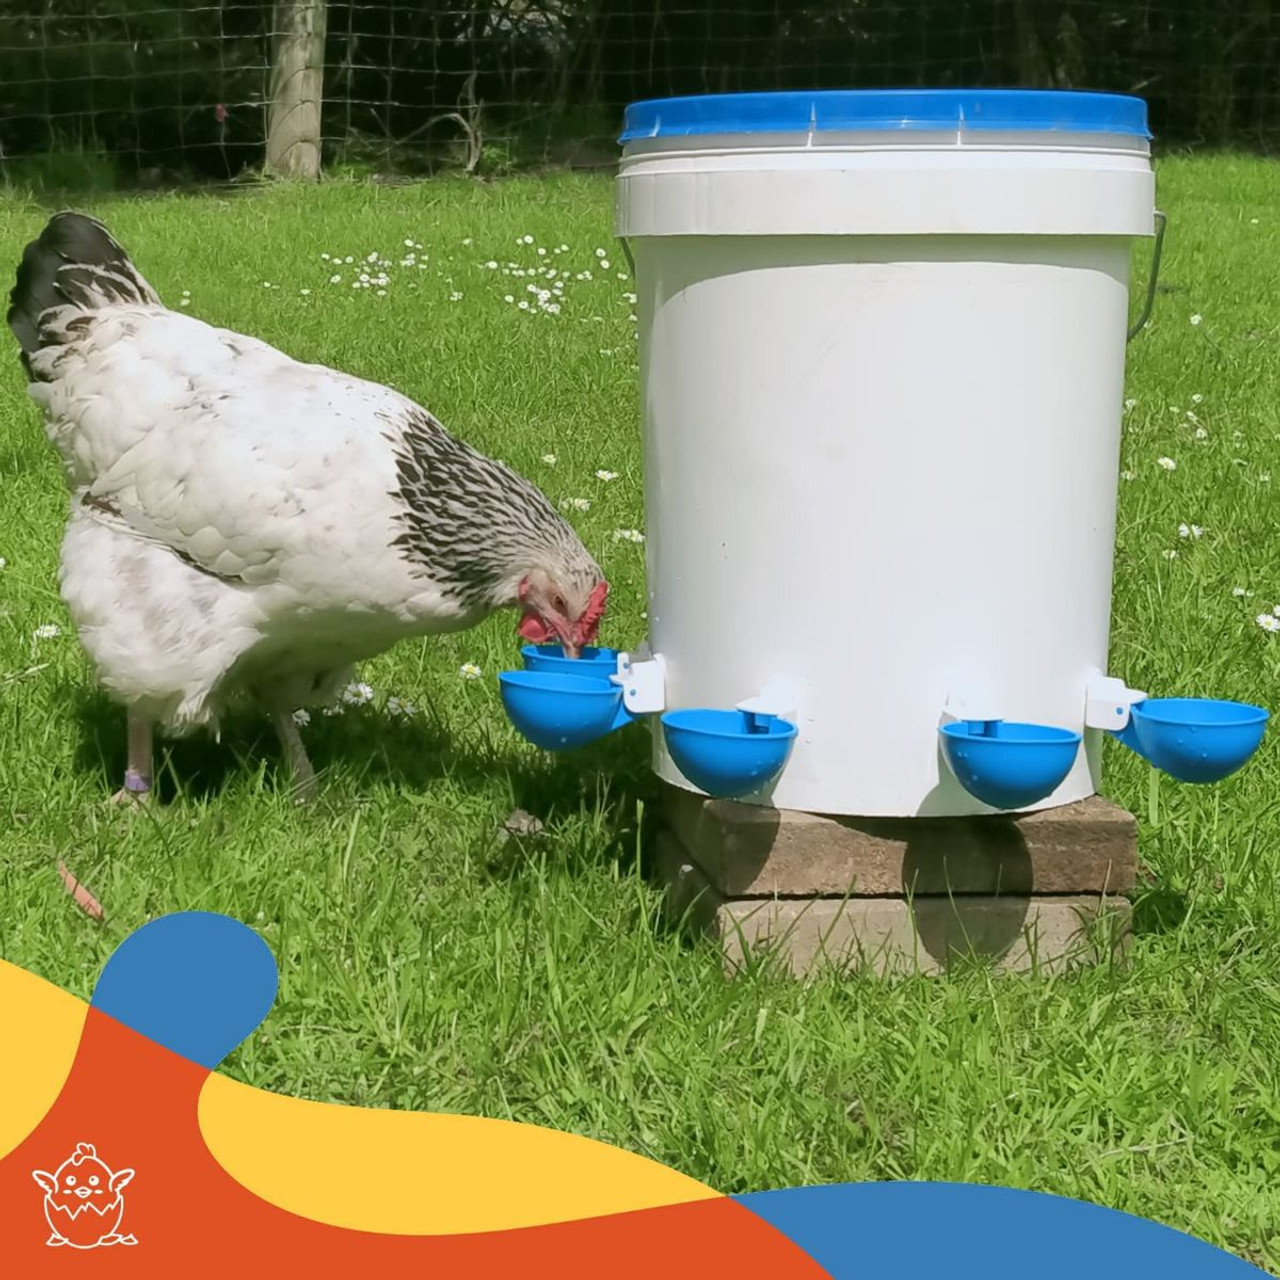 5 Pack Automatic Chicken Water Cups - Chicken Water Cups Suitable for Ducks, Geese, Turkeys and Bunny - Chicken Water Feeding Kit product image